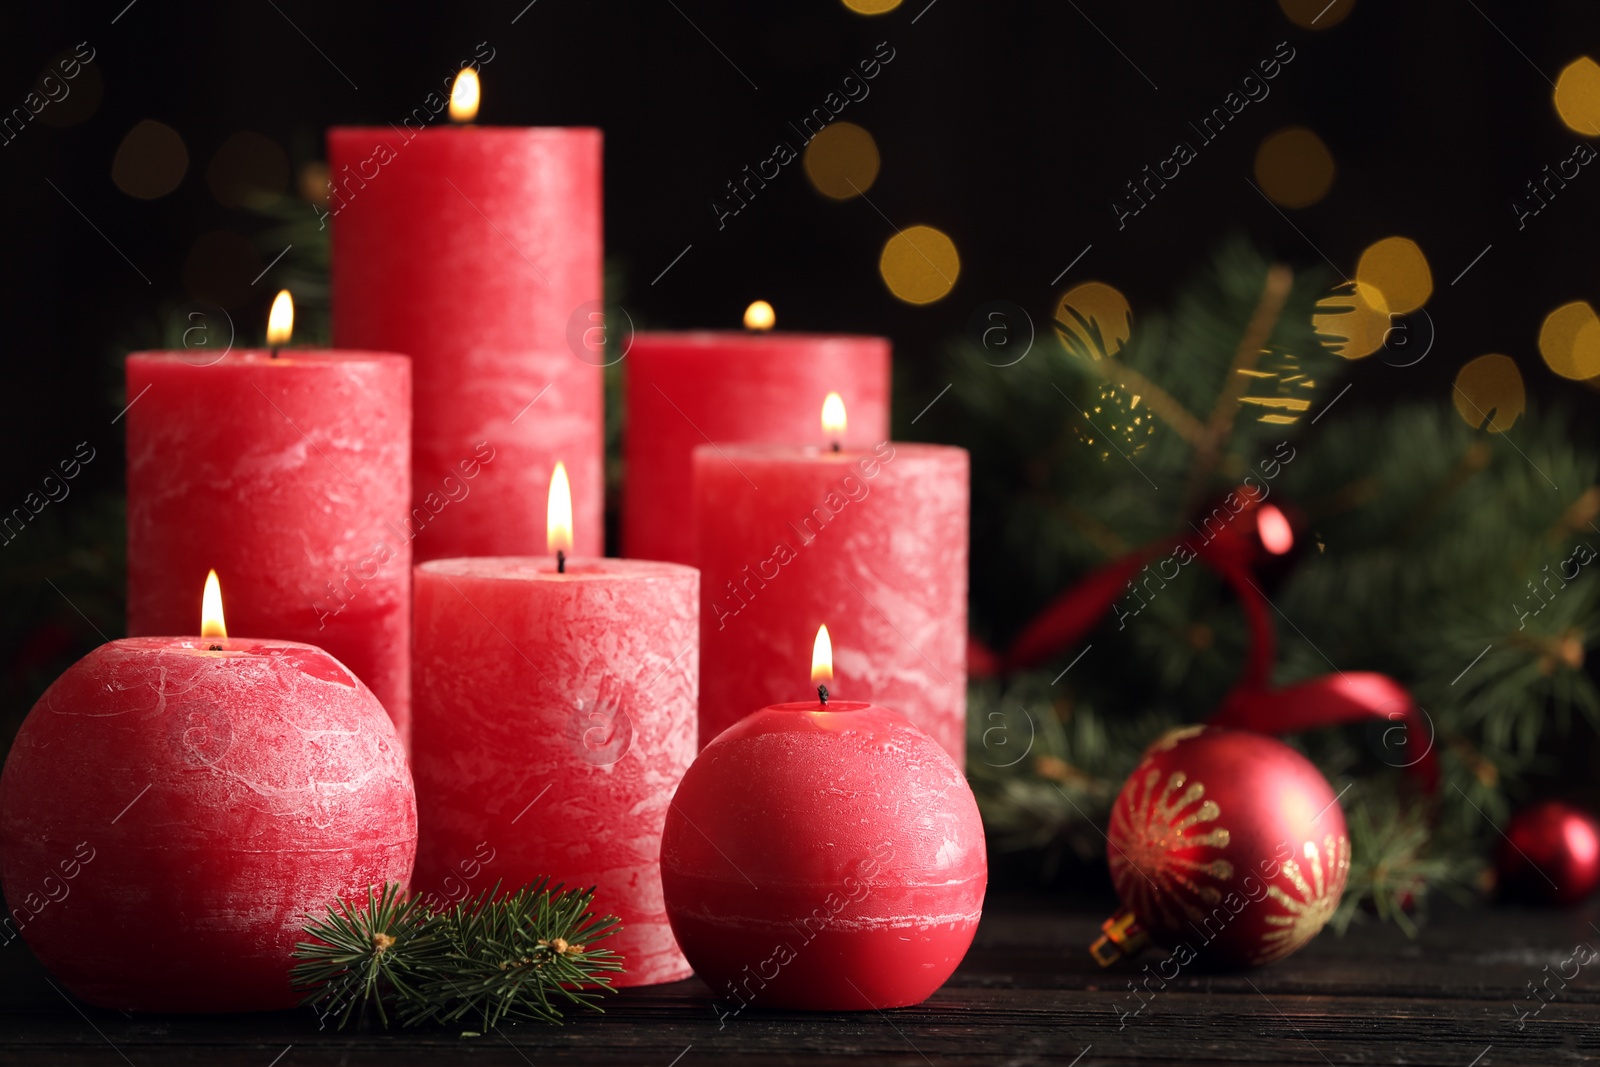 Photo of Burning red candles with Christmas decor on table against blurred lights